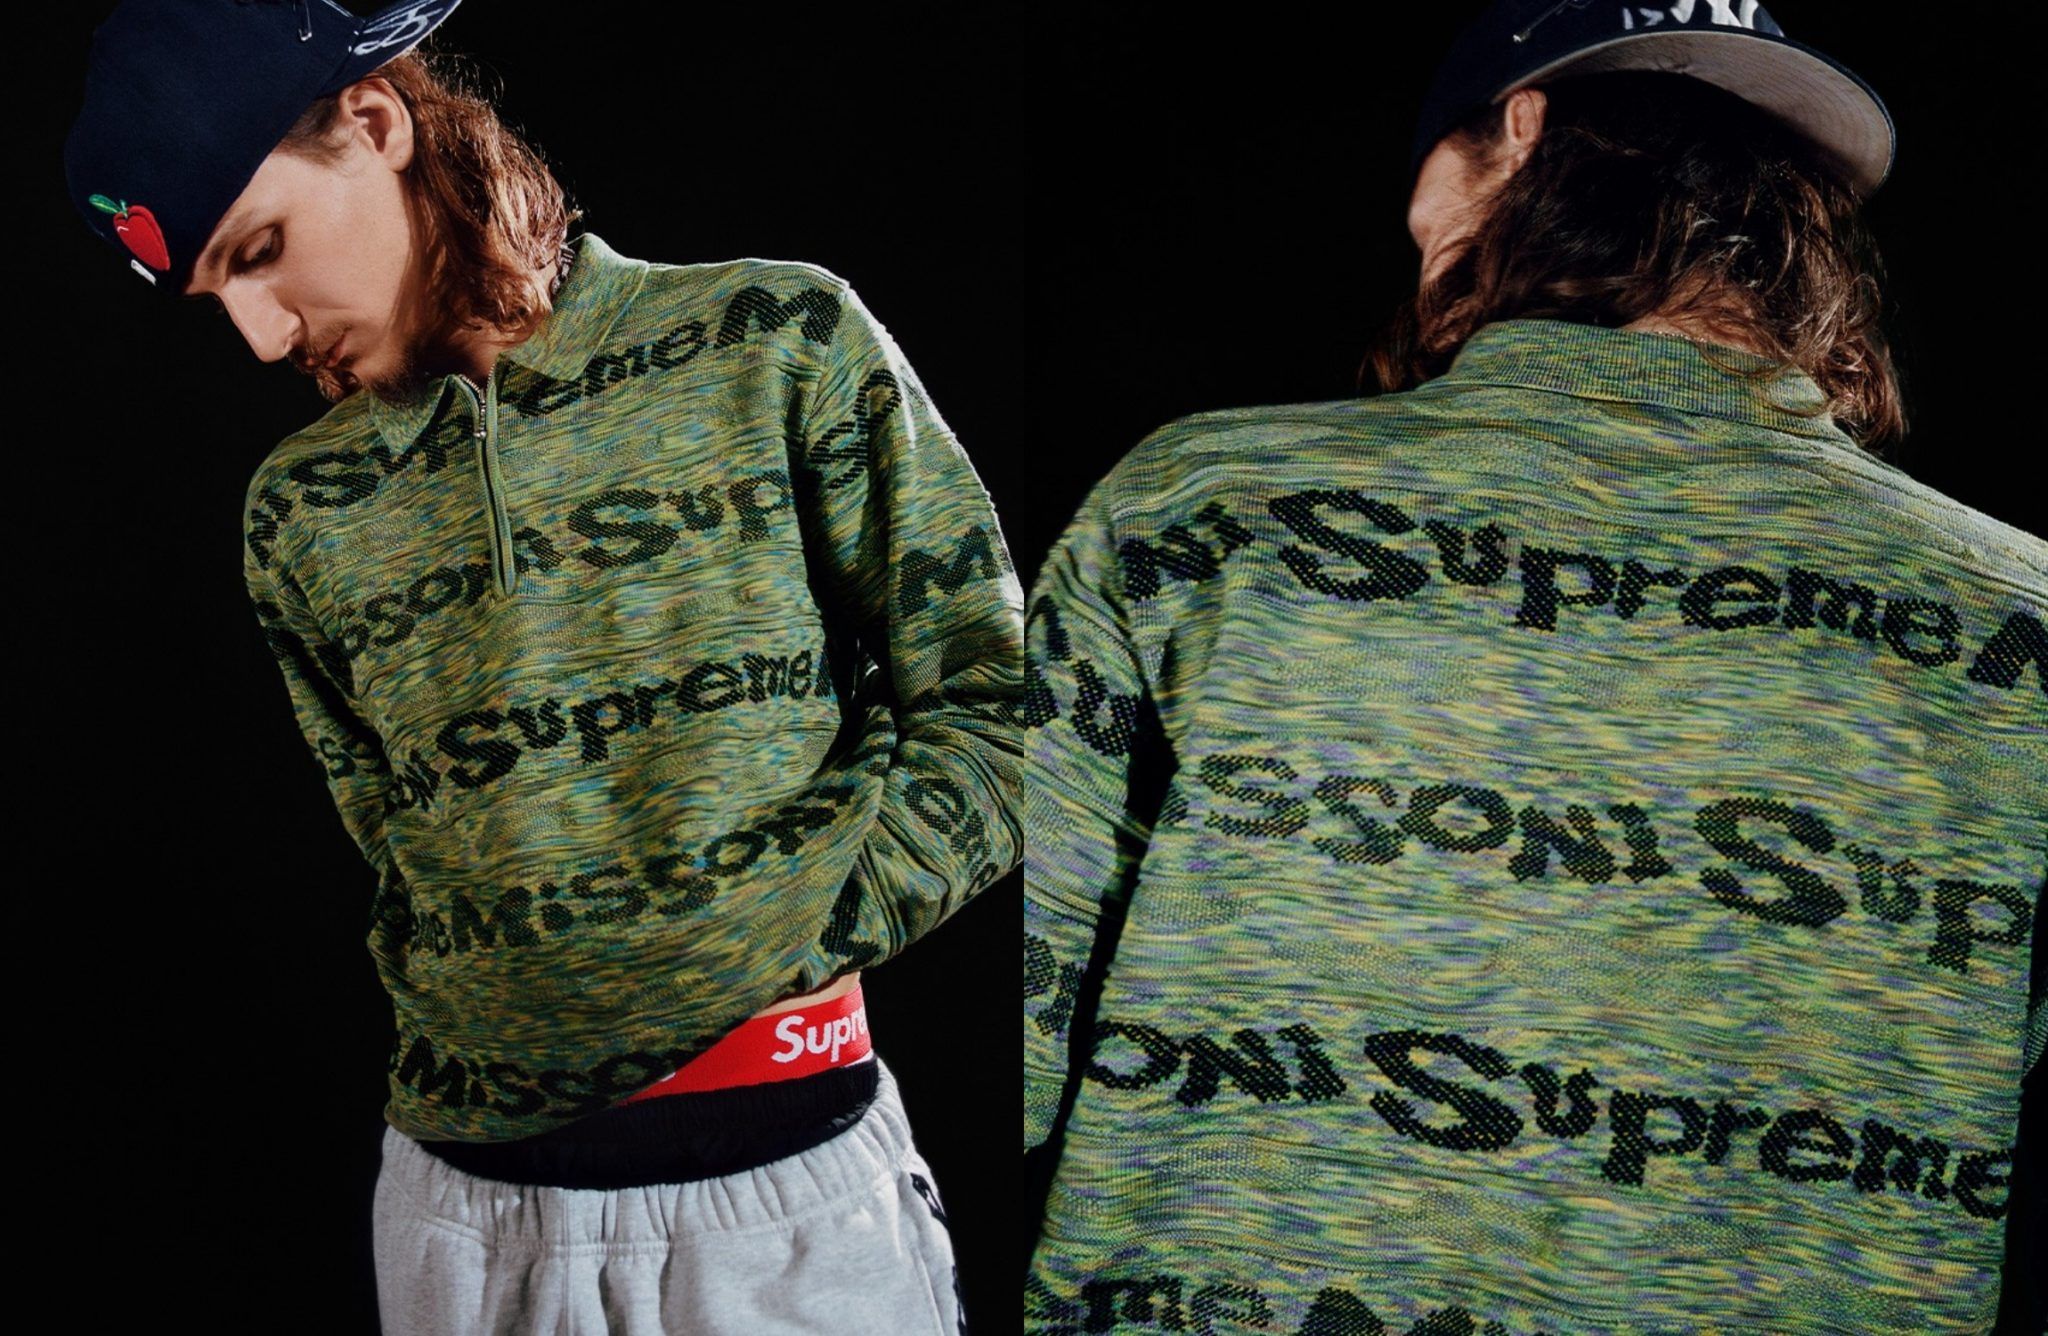 Supreme x Missoni: A closer look at all the pieces in the capsule ...